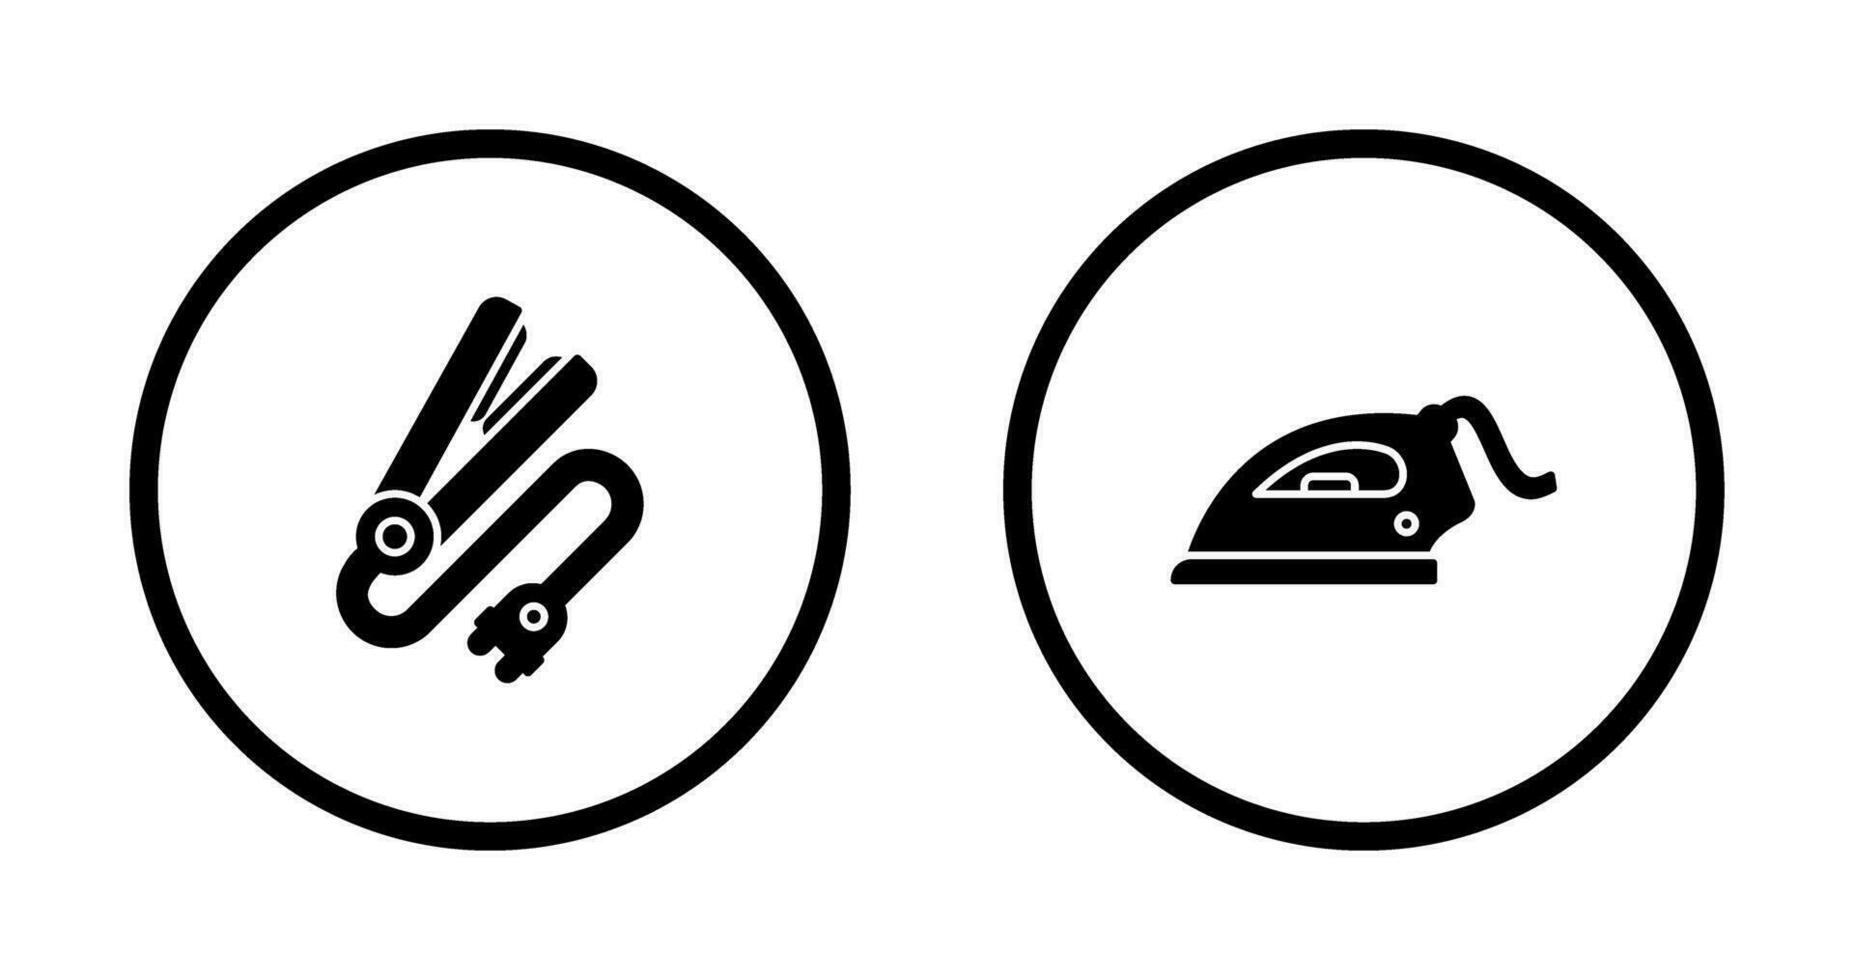 Hair iron and Laundry Icon vector